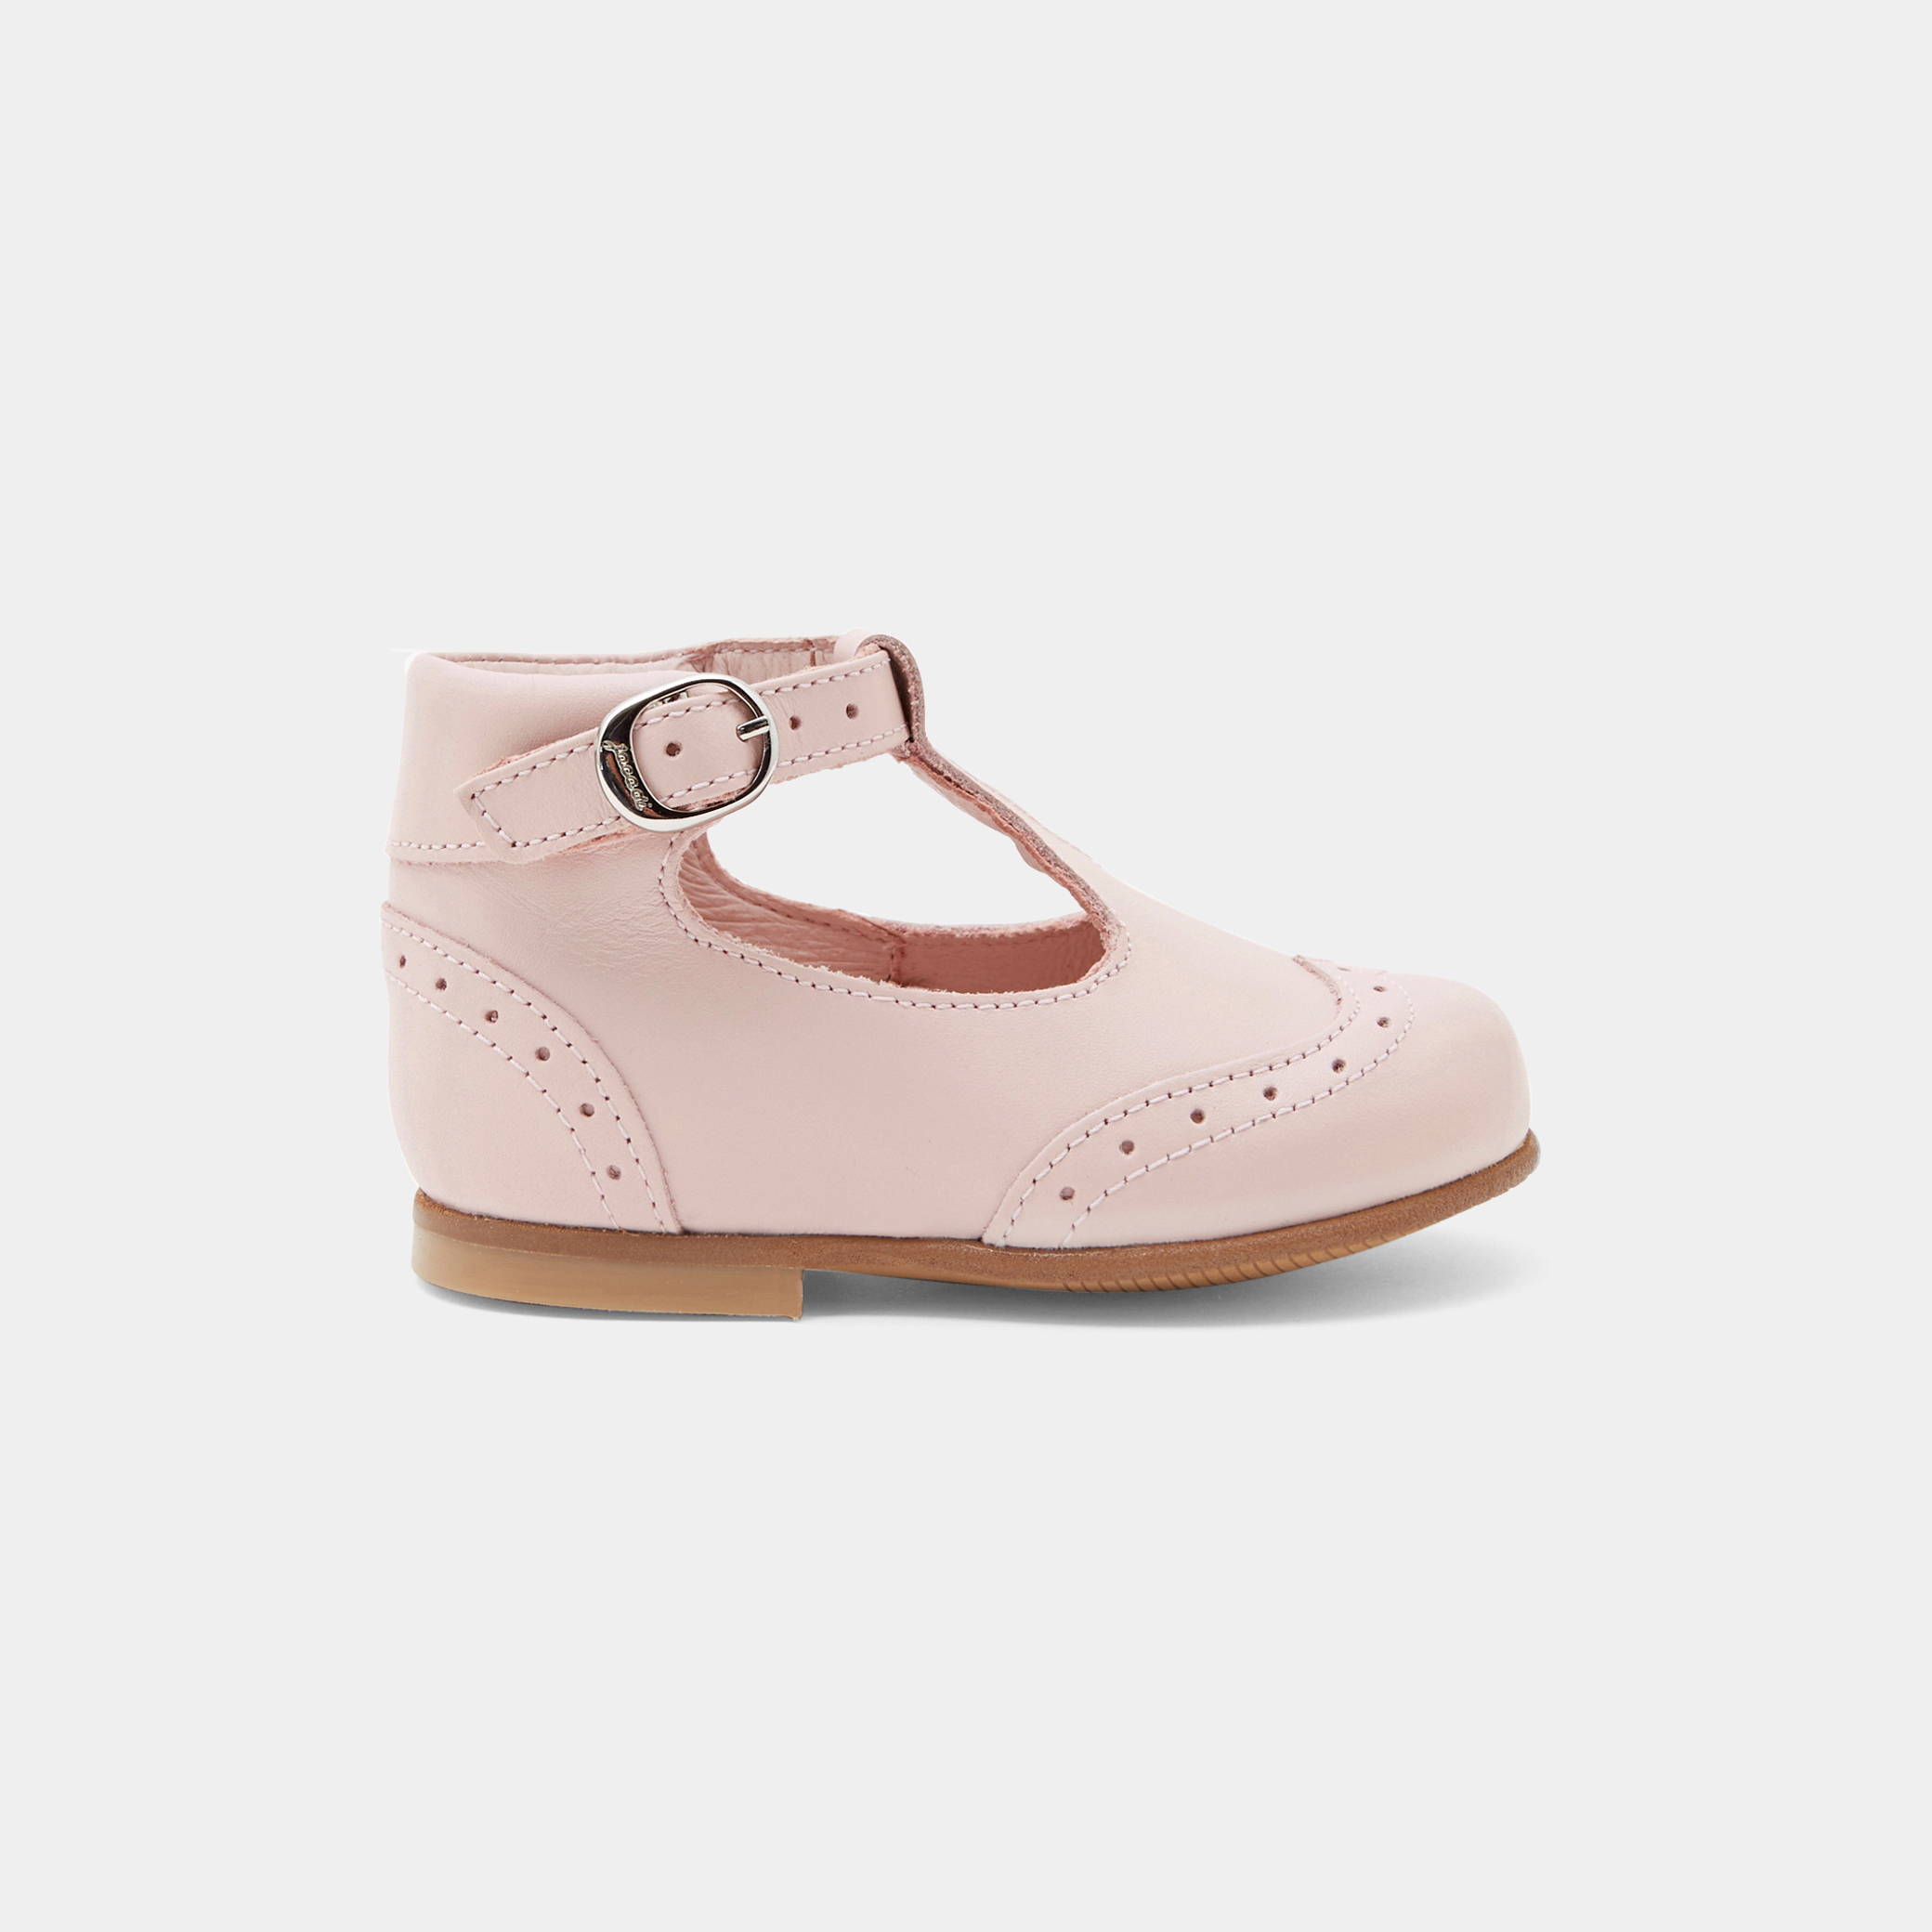 Baby girl T-strap shoes